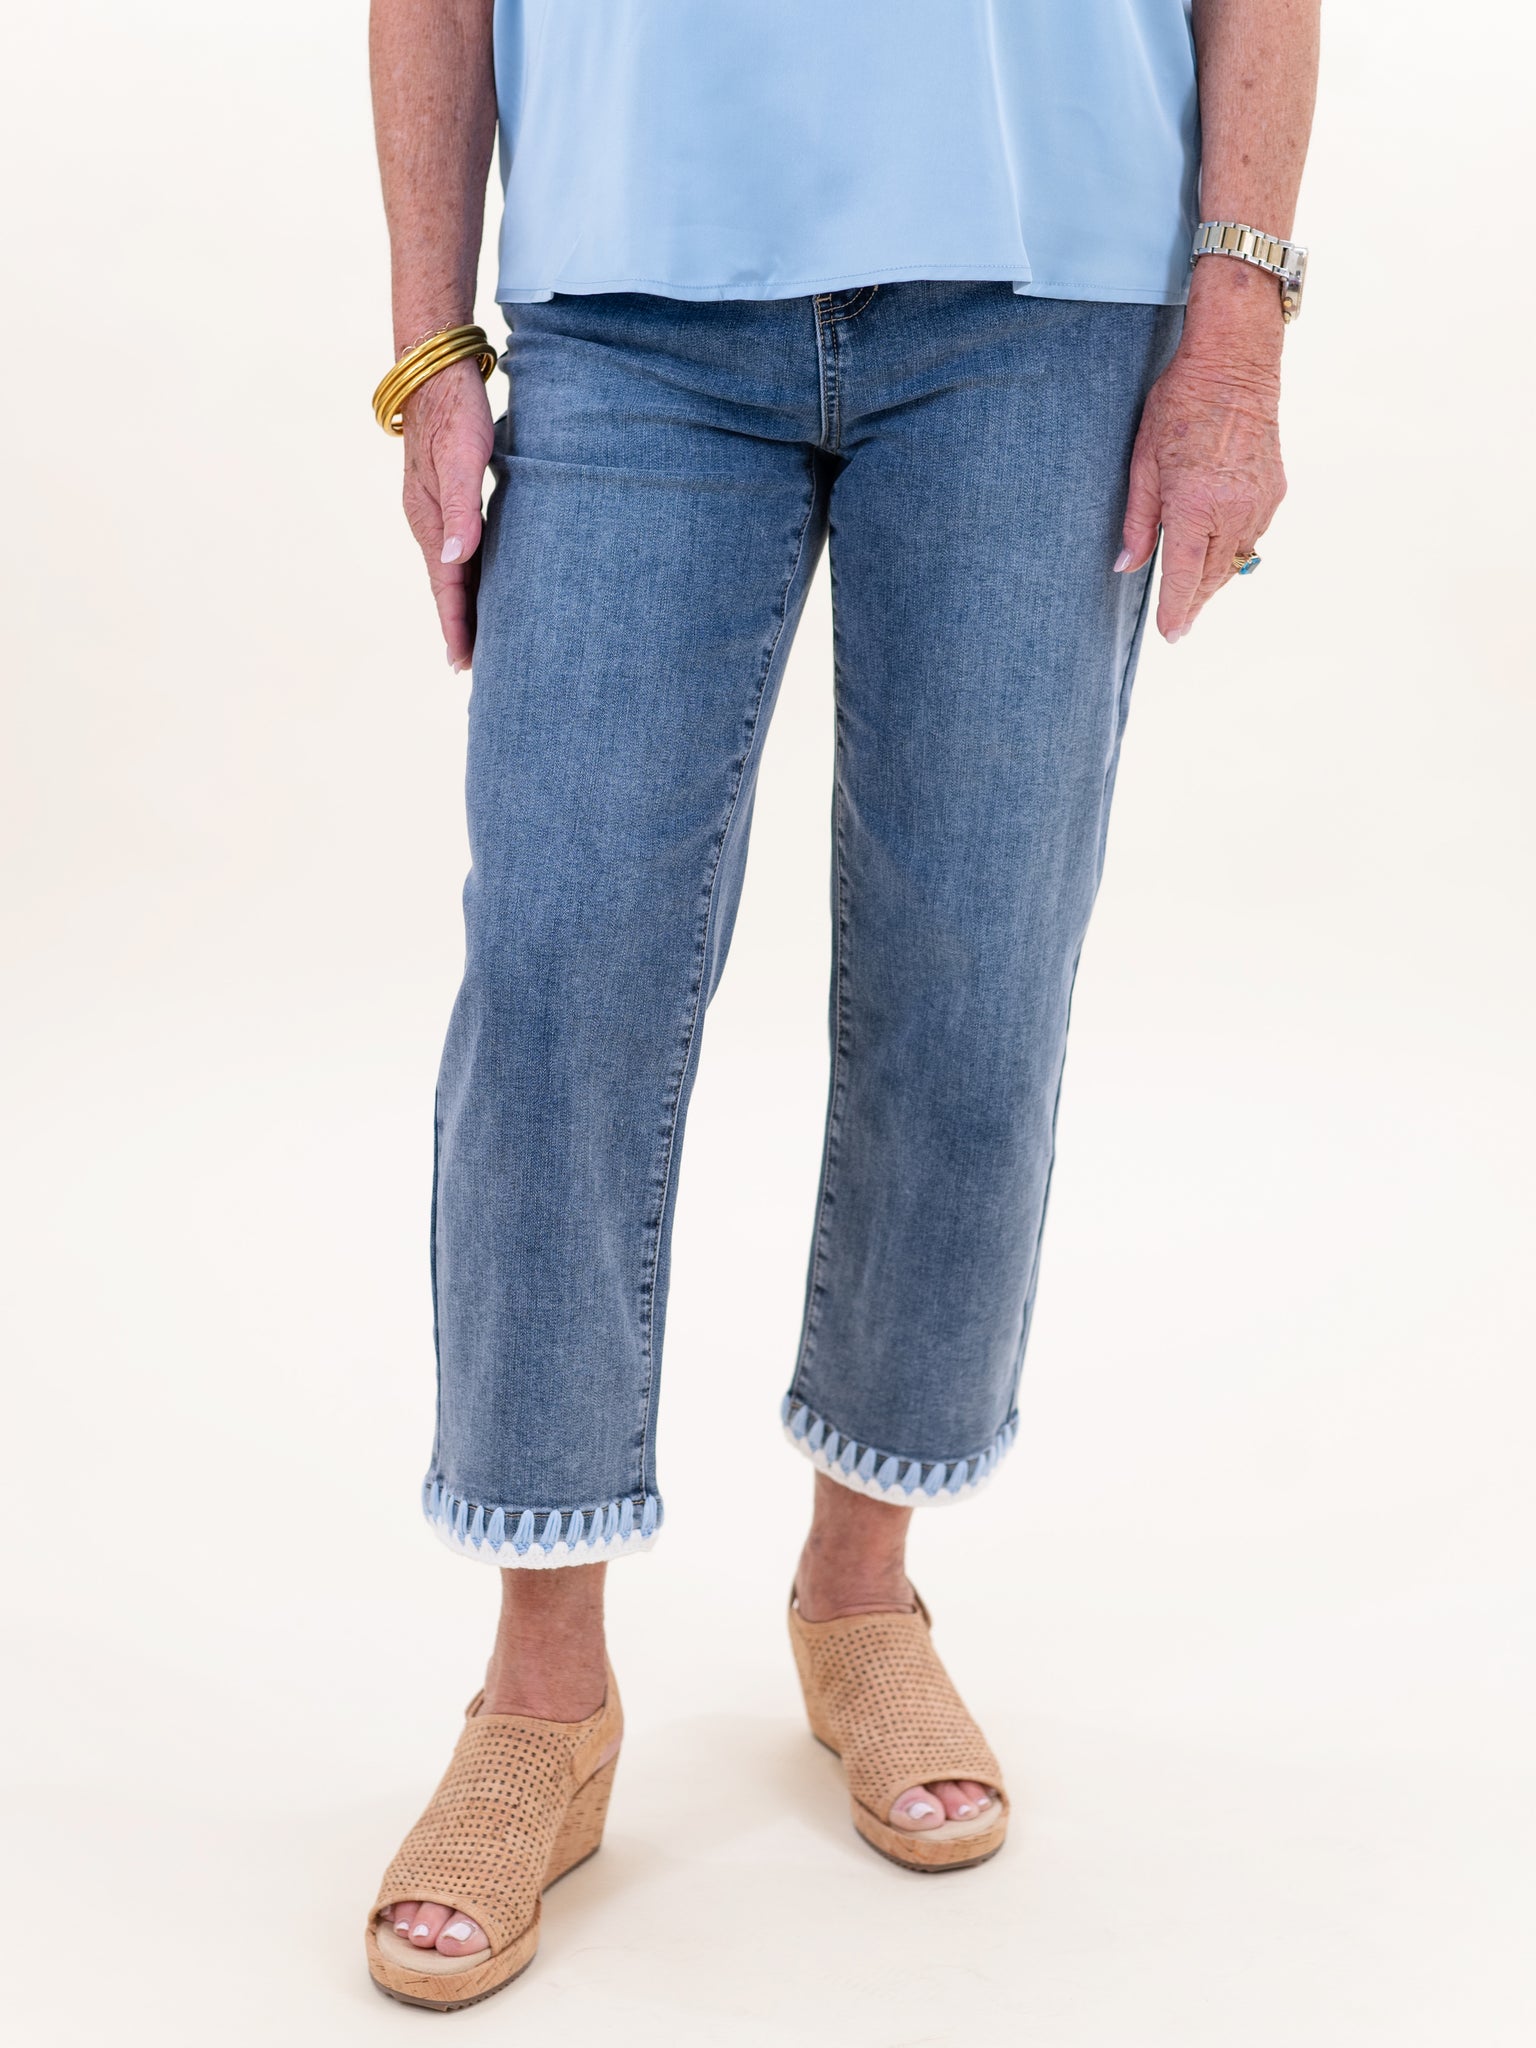 Straight Leg Jeans w/ Embroidered Hem by Charlie B